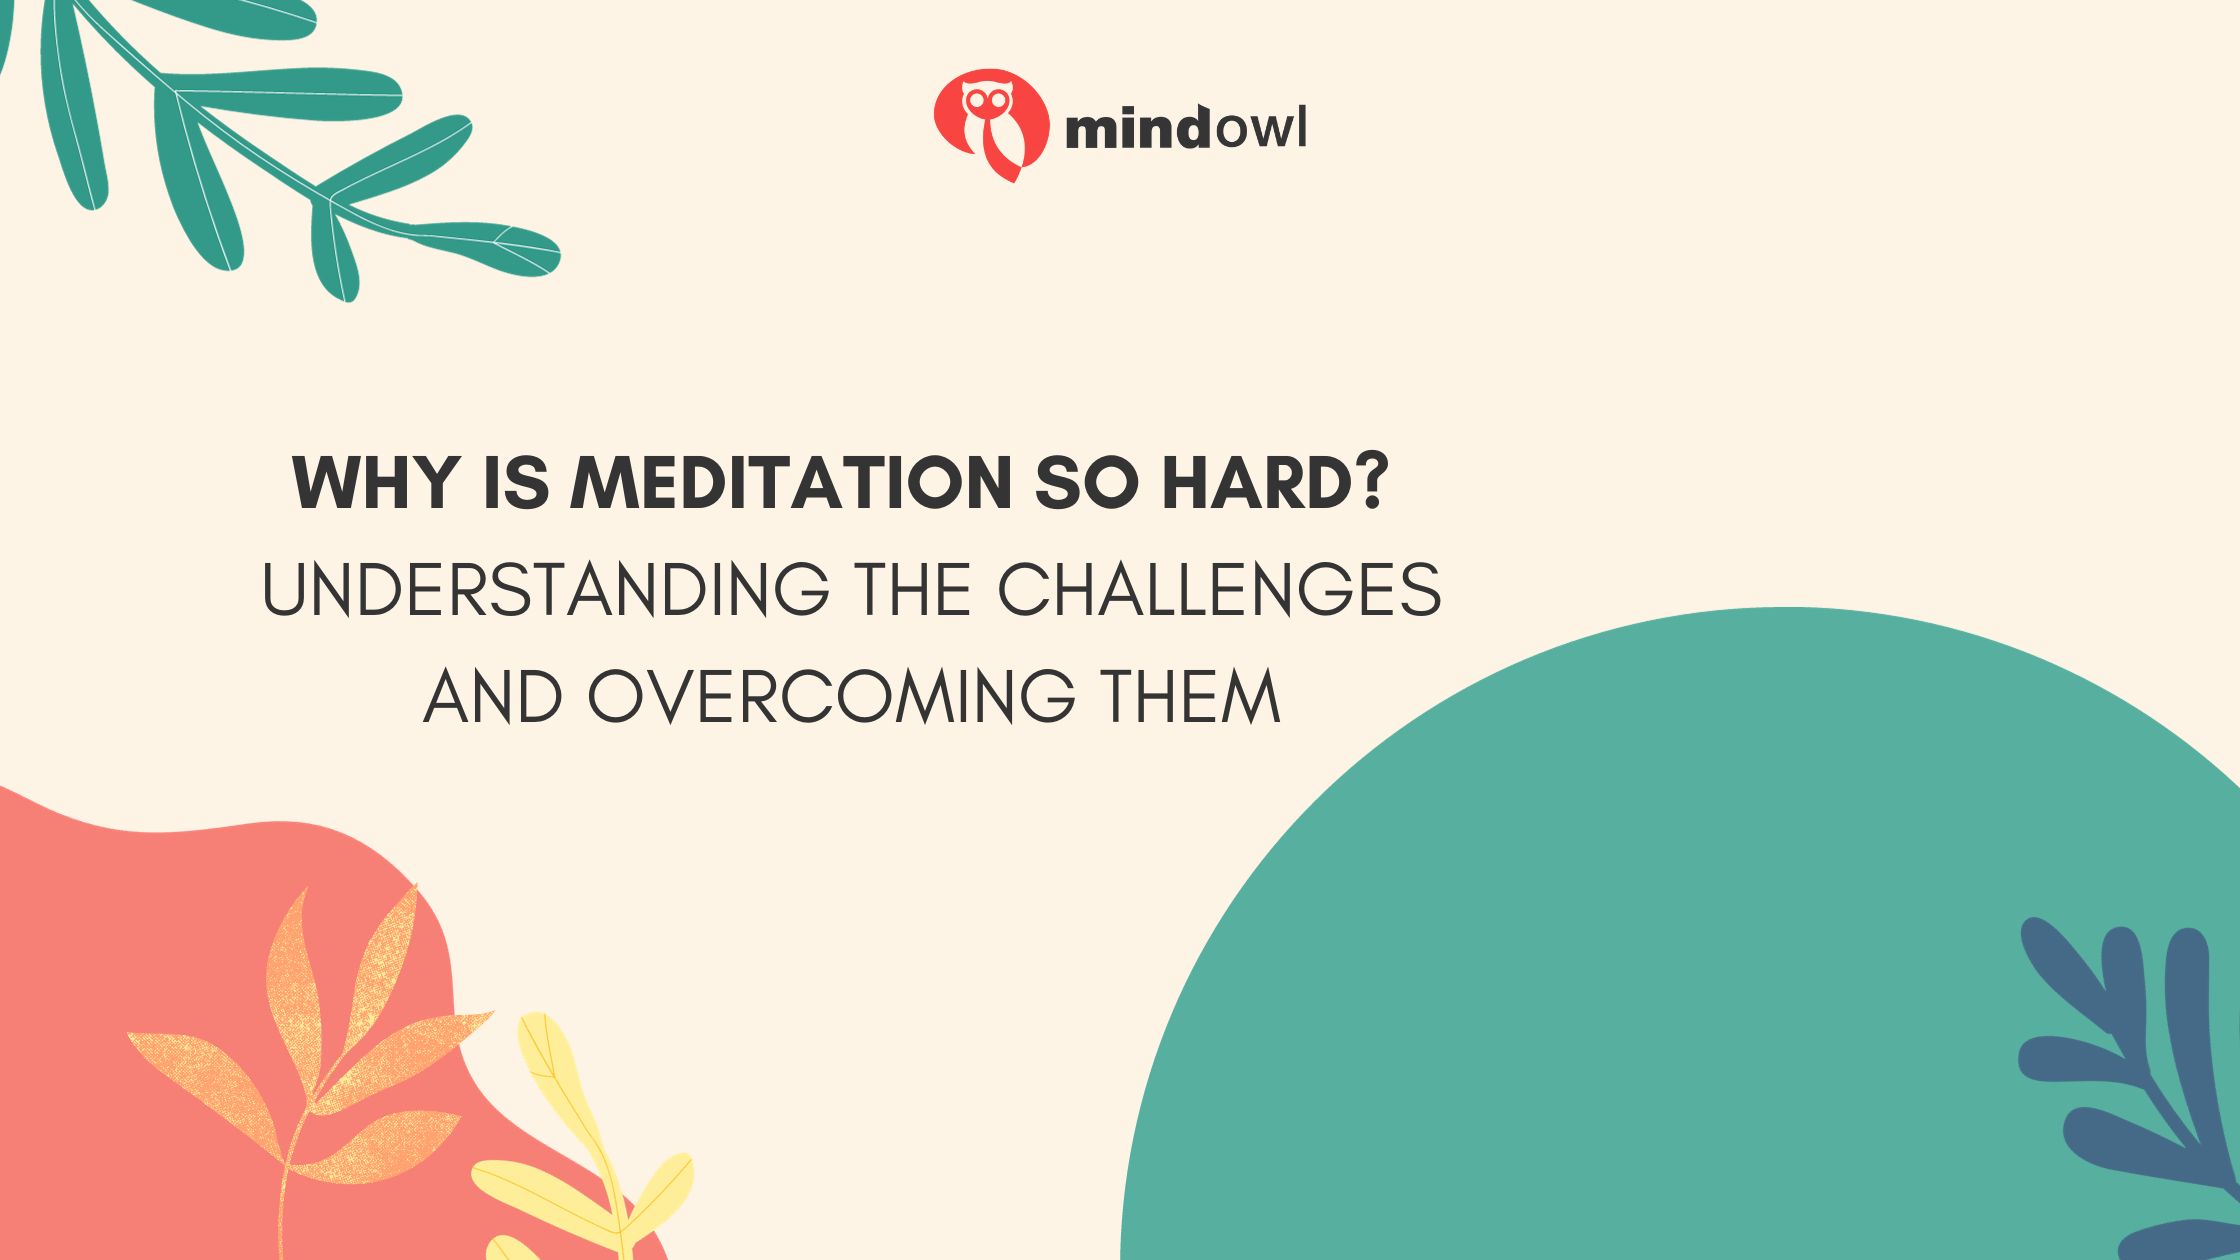 Why Is Meditation So Hard? Understanding The Challenges And Overcoming Them